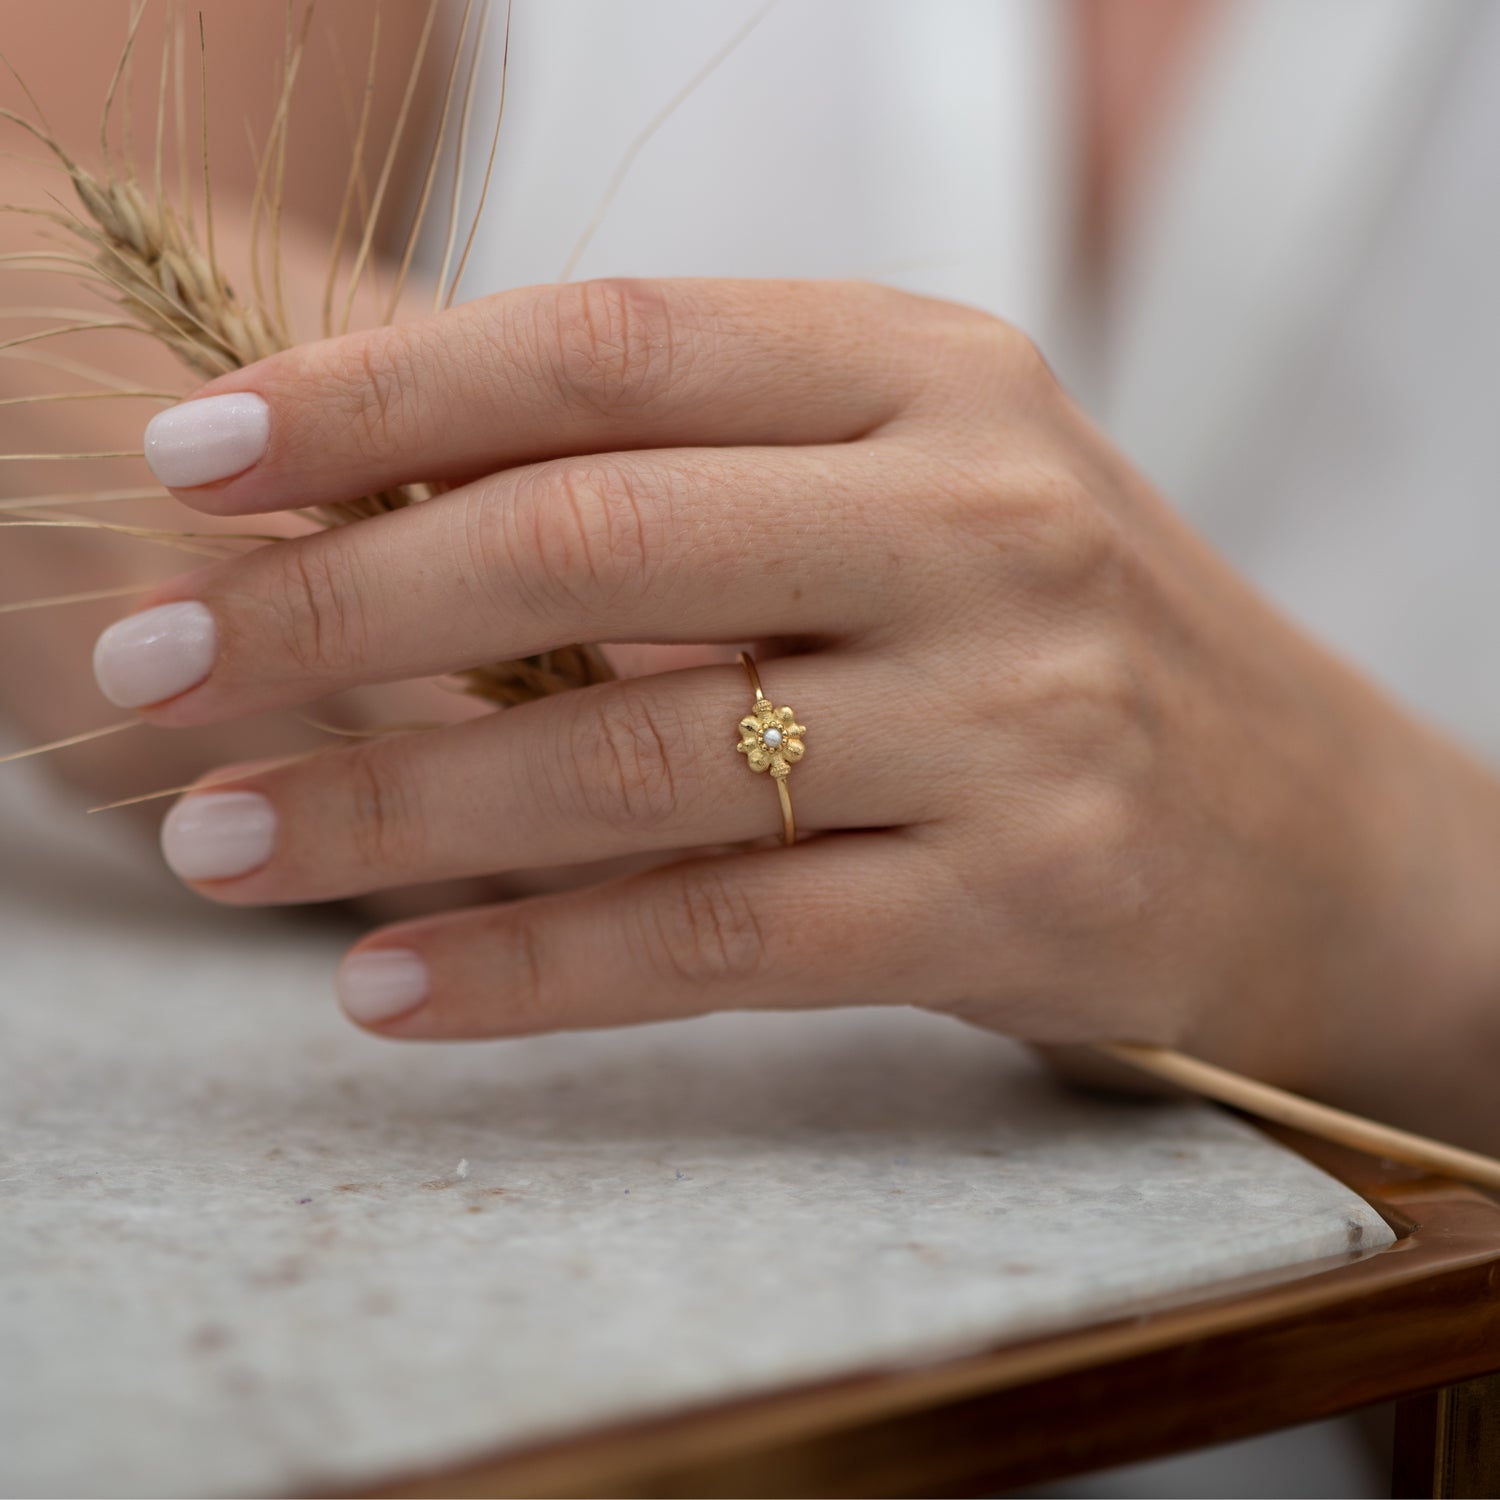 5 Must-Have Designs for Pearl Rings in Gold – Blingvine